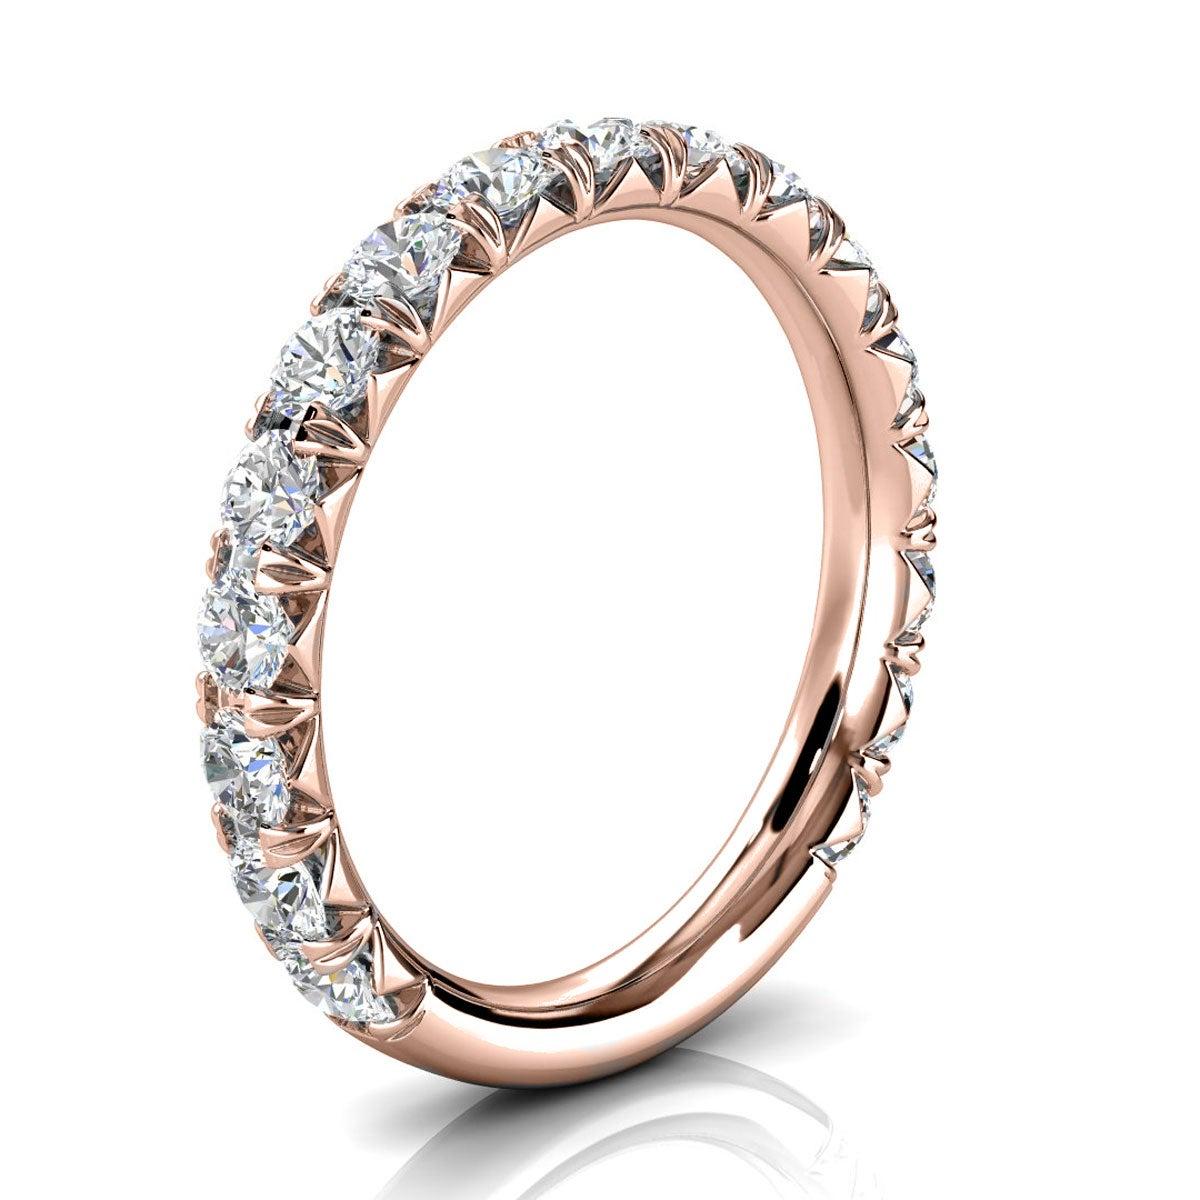 For Sale:  14k Rose Gold GIA French Pave Diamond Ring '1 Ct. Tw' 2